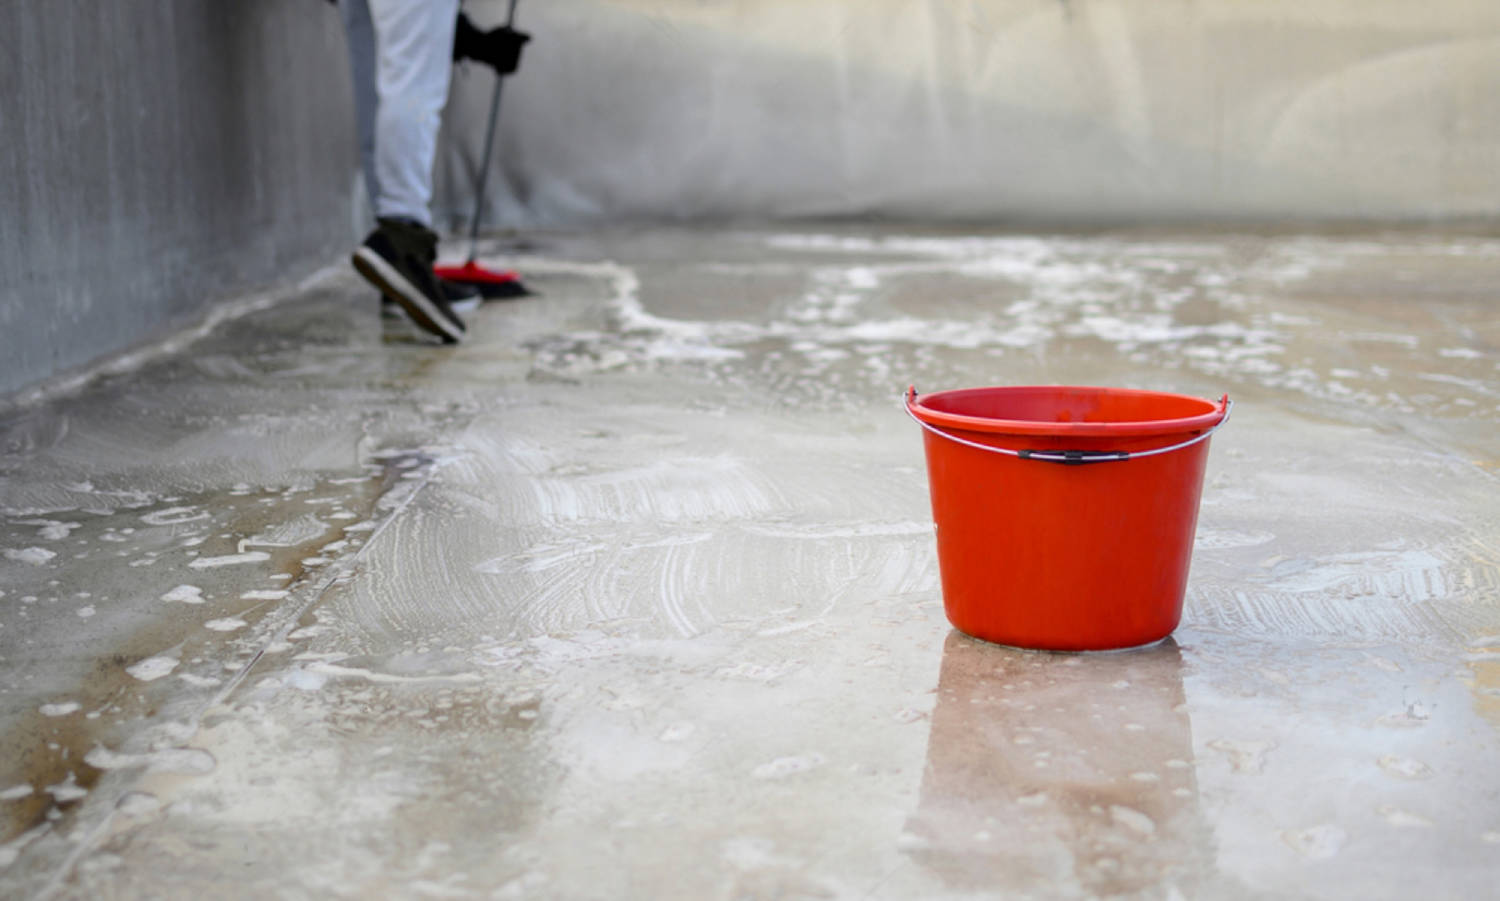 6 Easy Ways To Clean Concrete Without a Pressure Washer